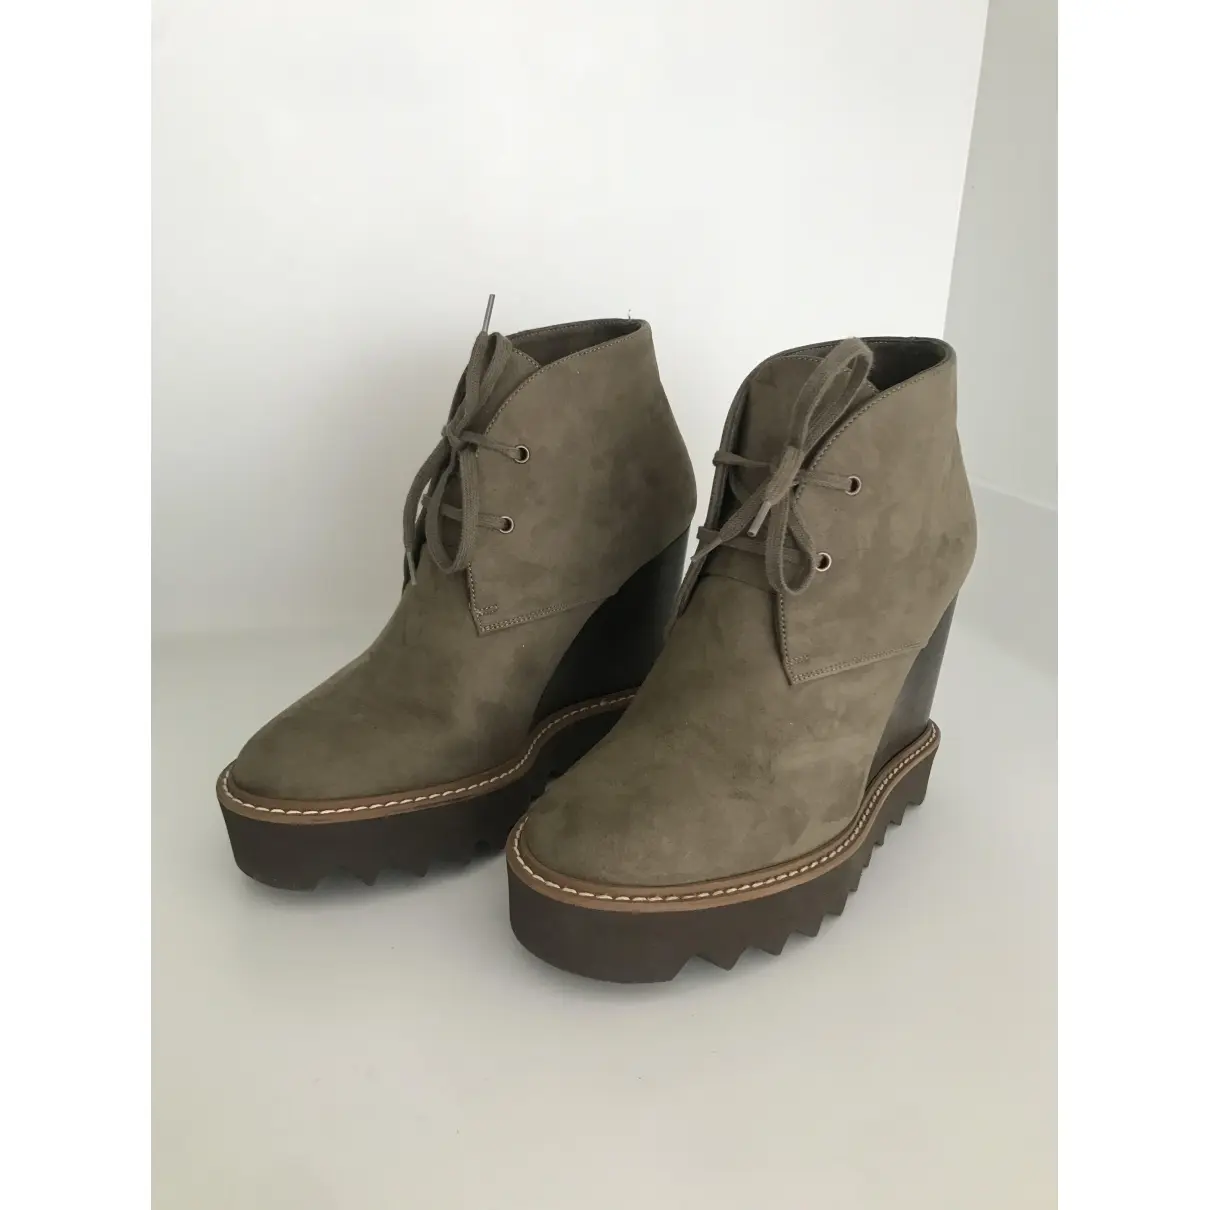 Stella McCartney Cloth lace up boots for sale